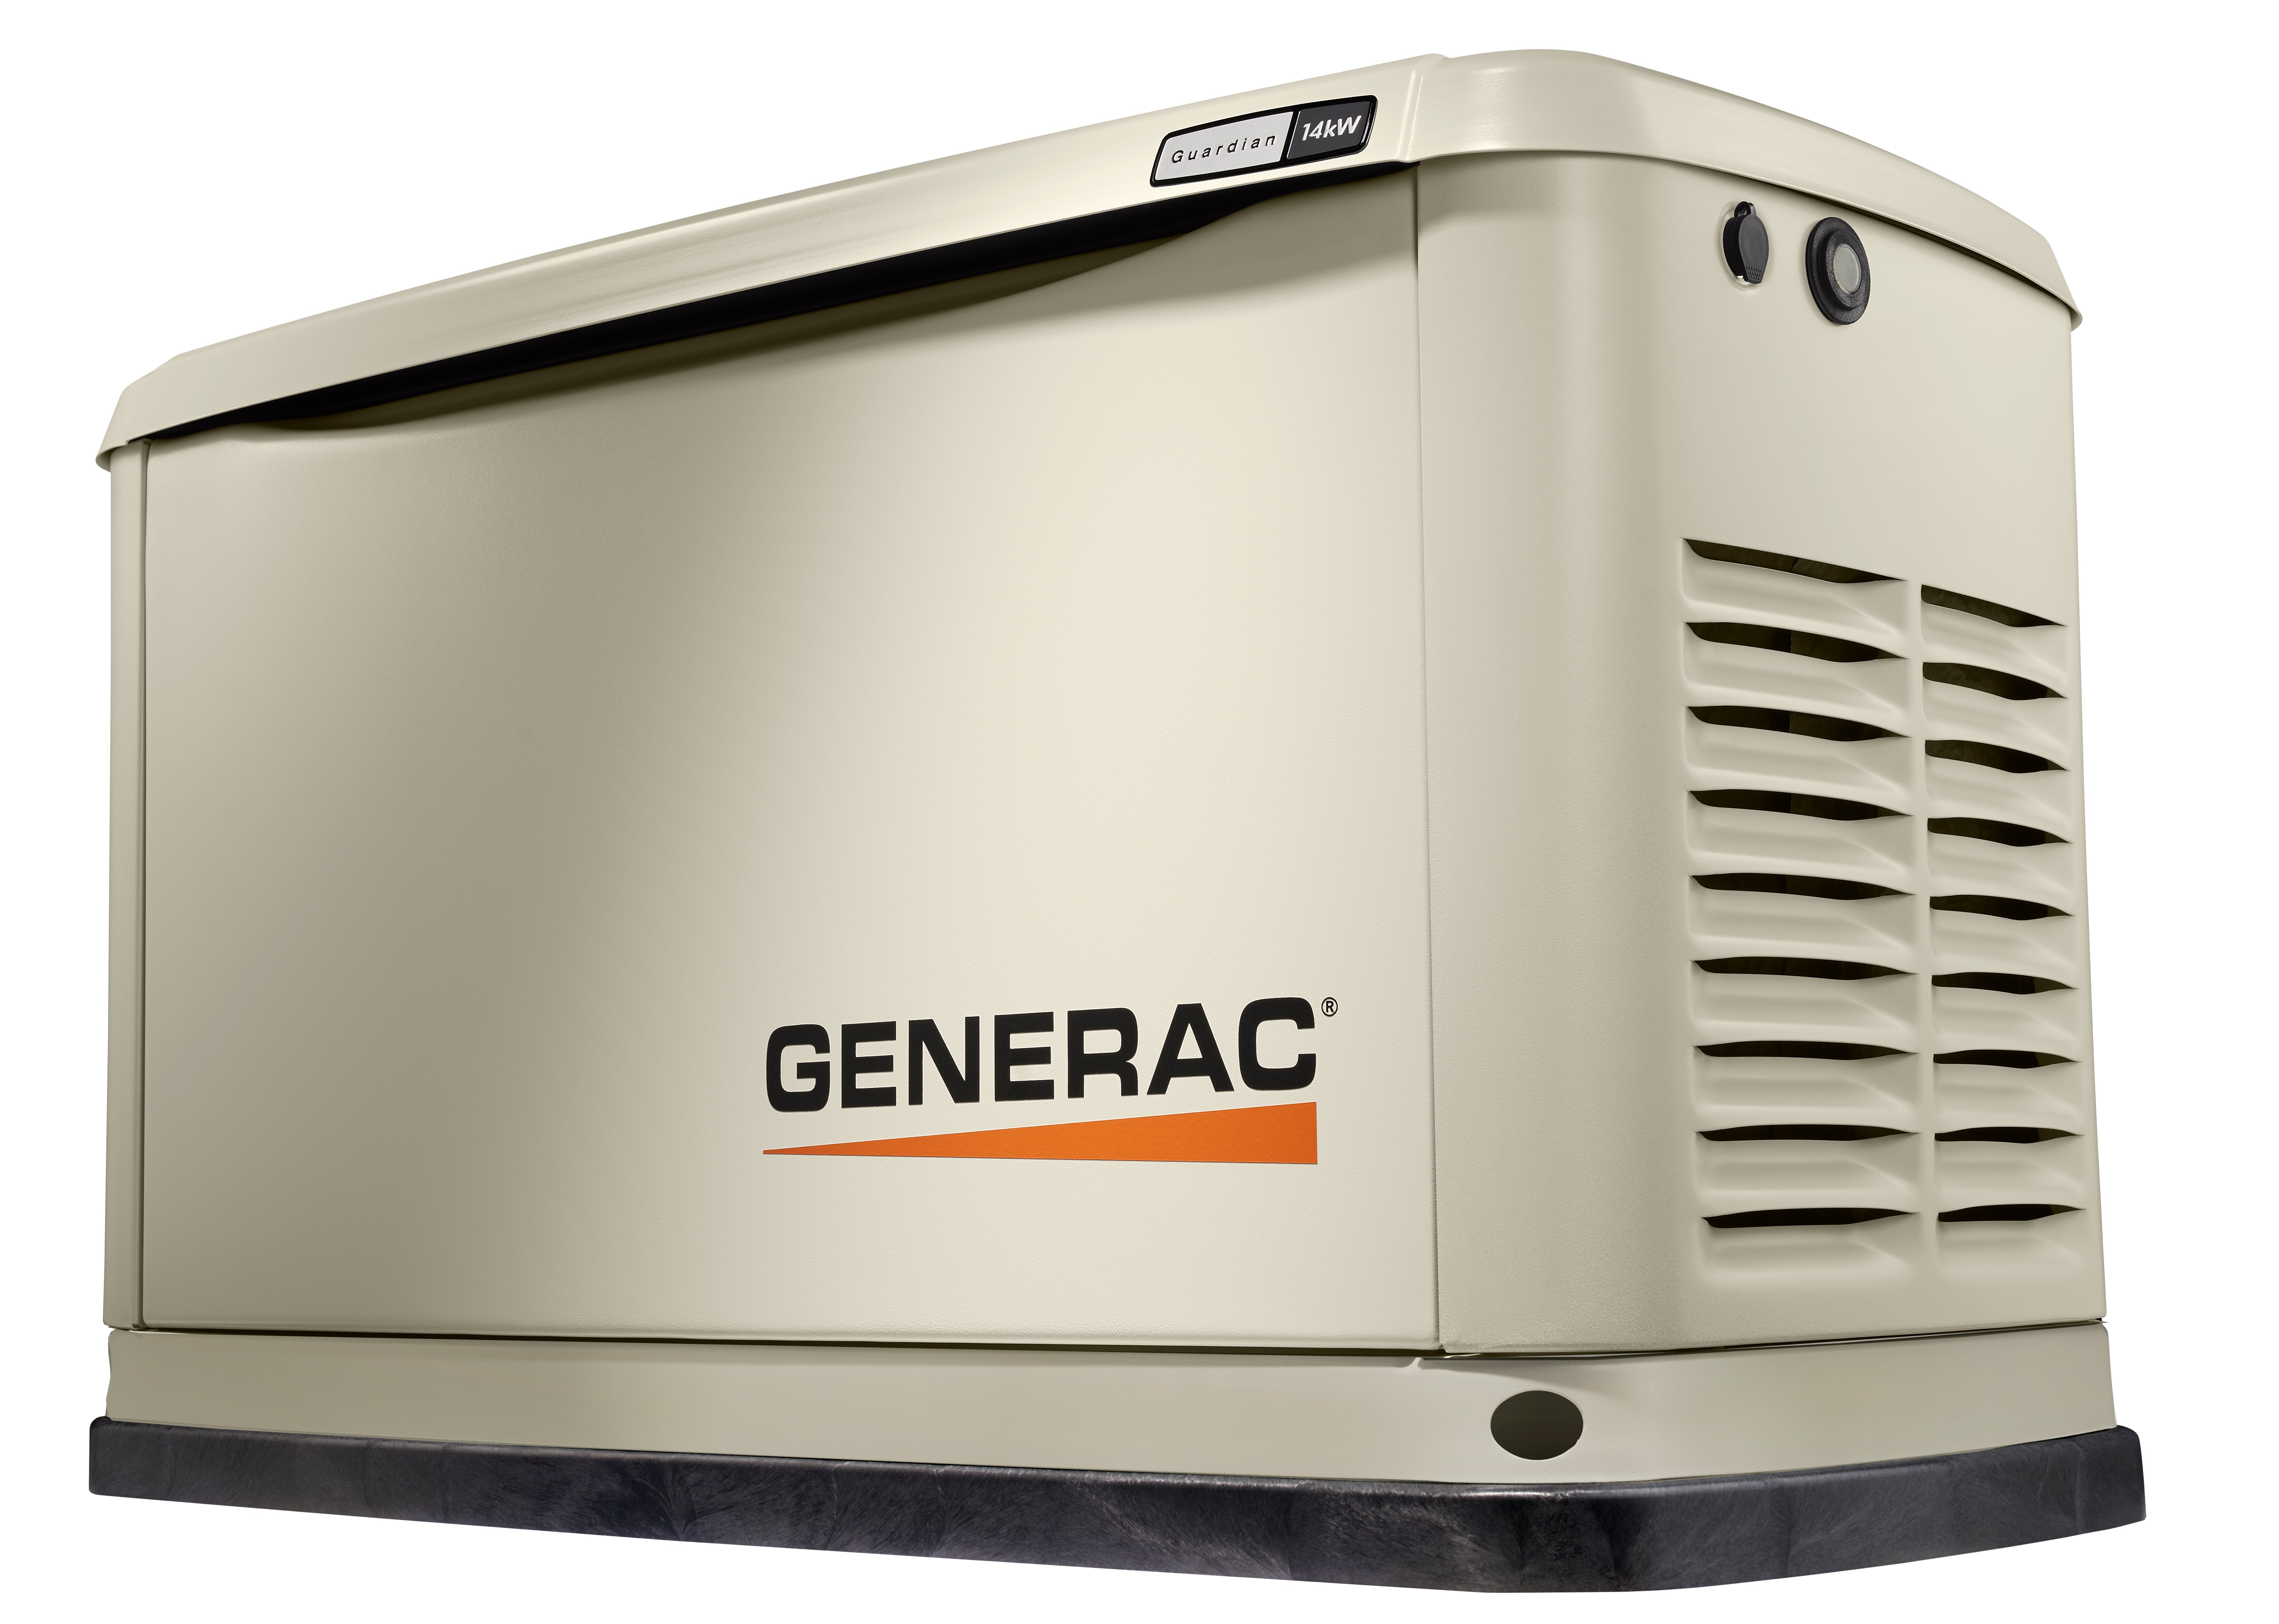 Standby Generator 14kW WiFi-Enabled MODEL #7223 product image